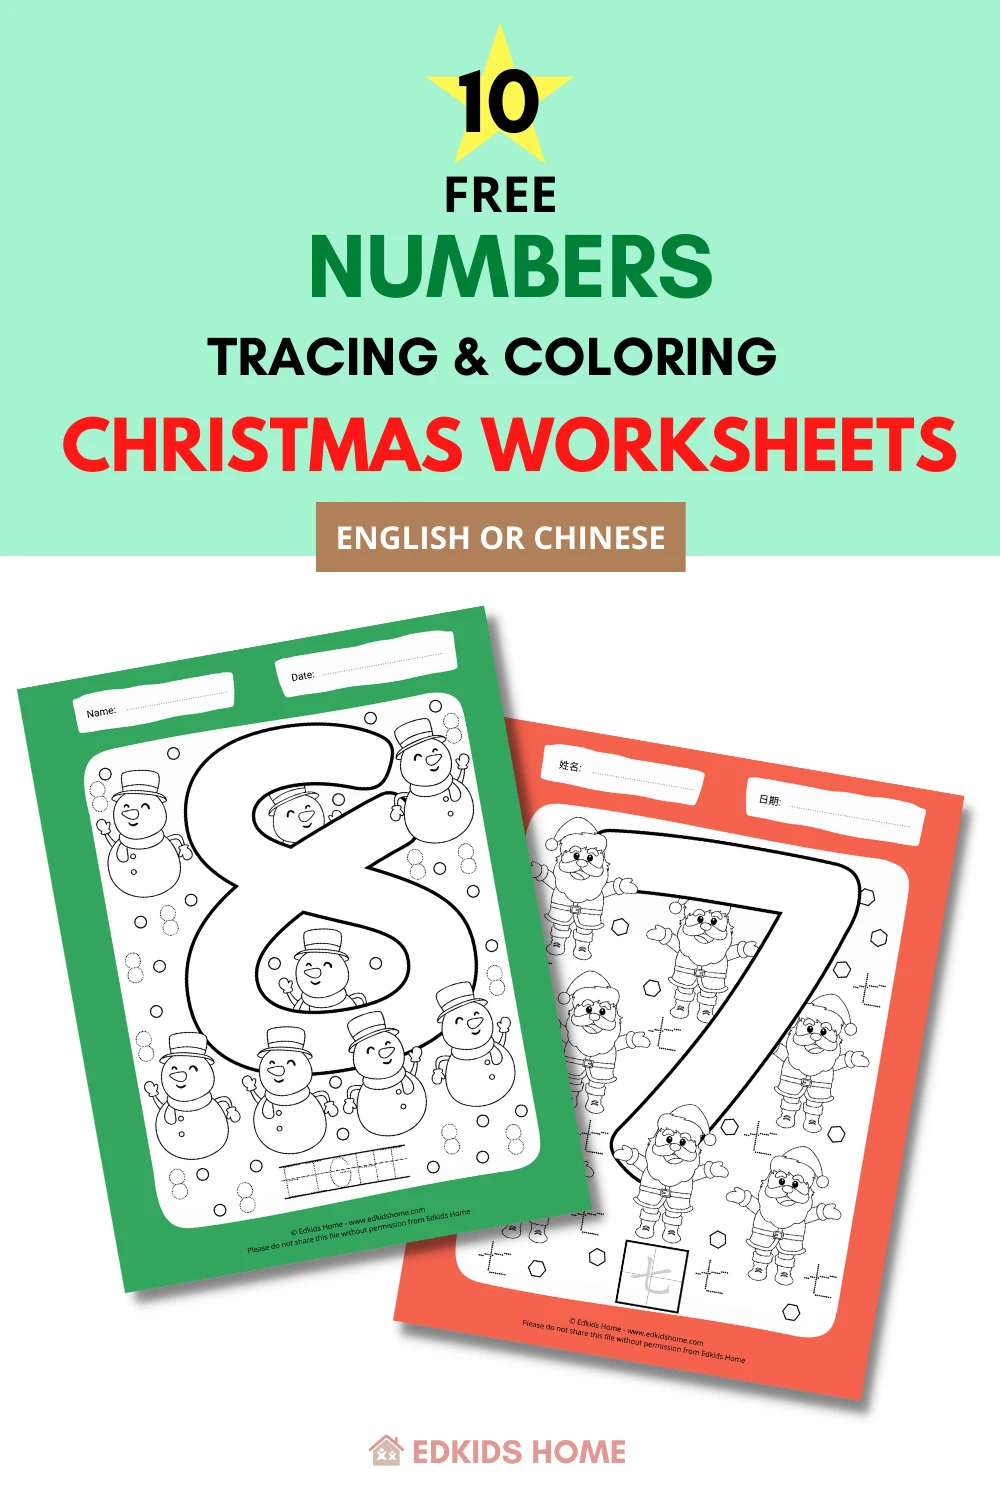 10 Free English / Chinese Numbers Tracing & Coloring Christmas Worksheets 